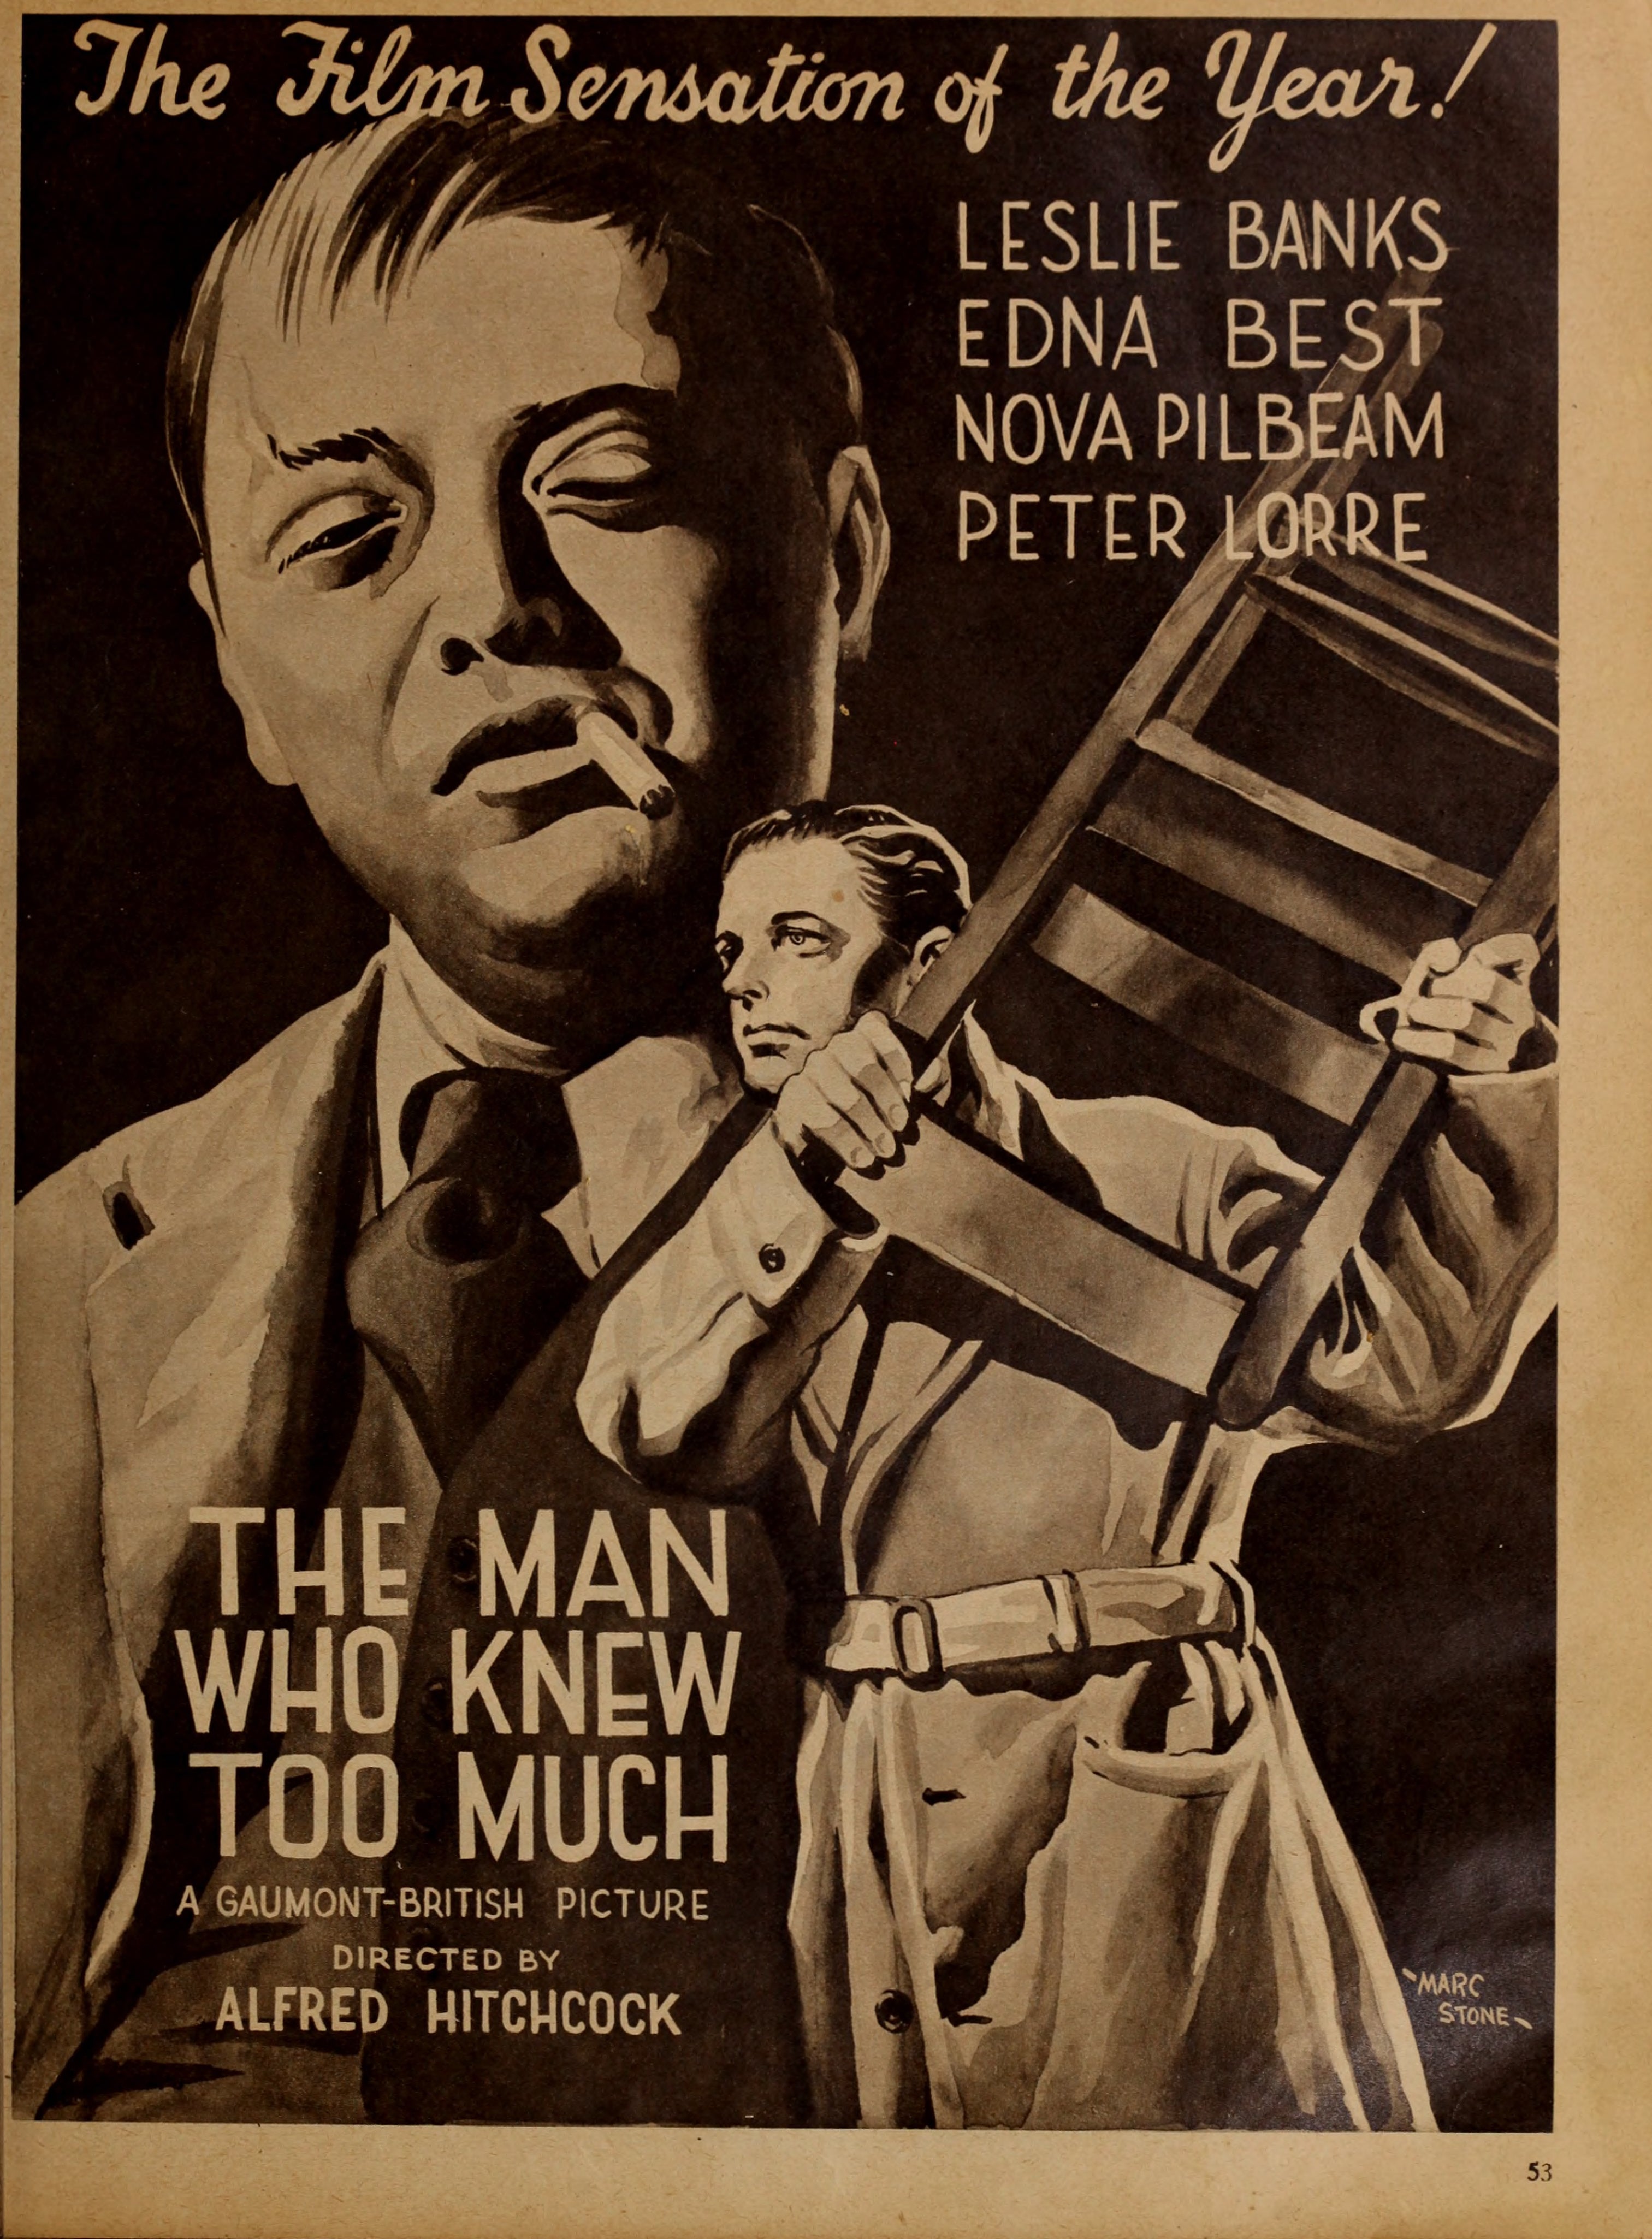 The Man Who Knew Too Much (1934) | www.vintoz.com